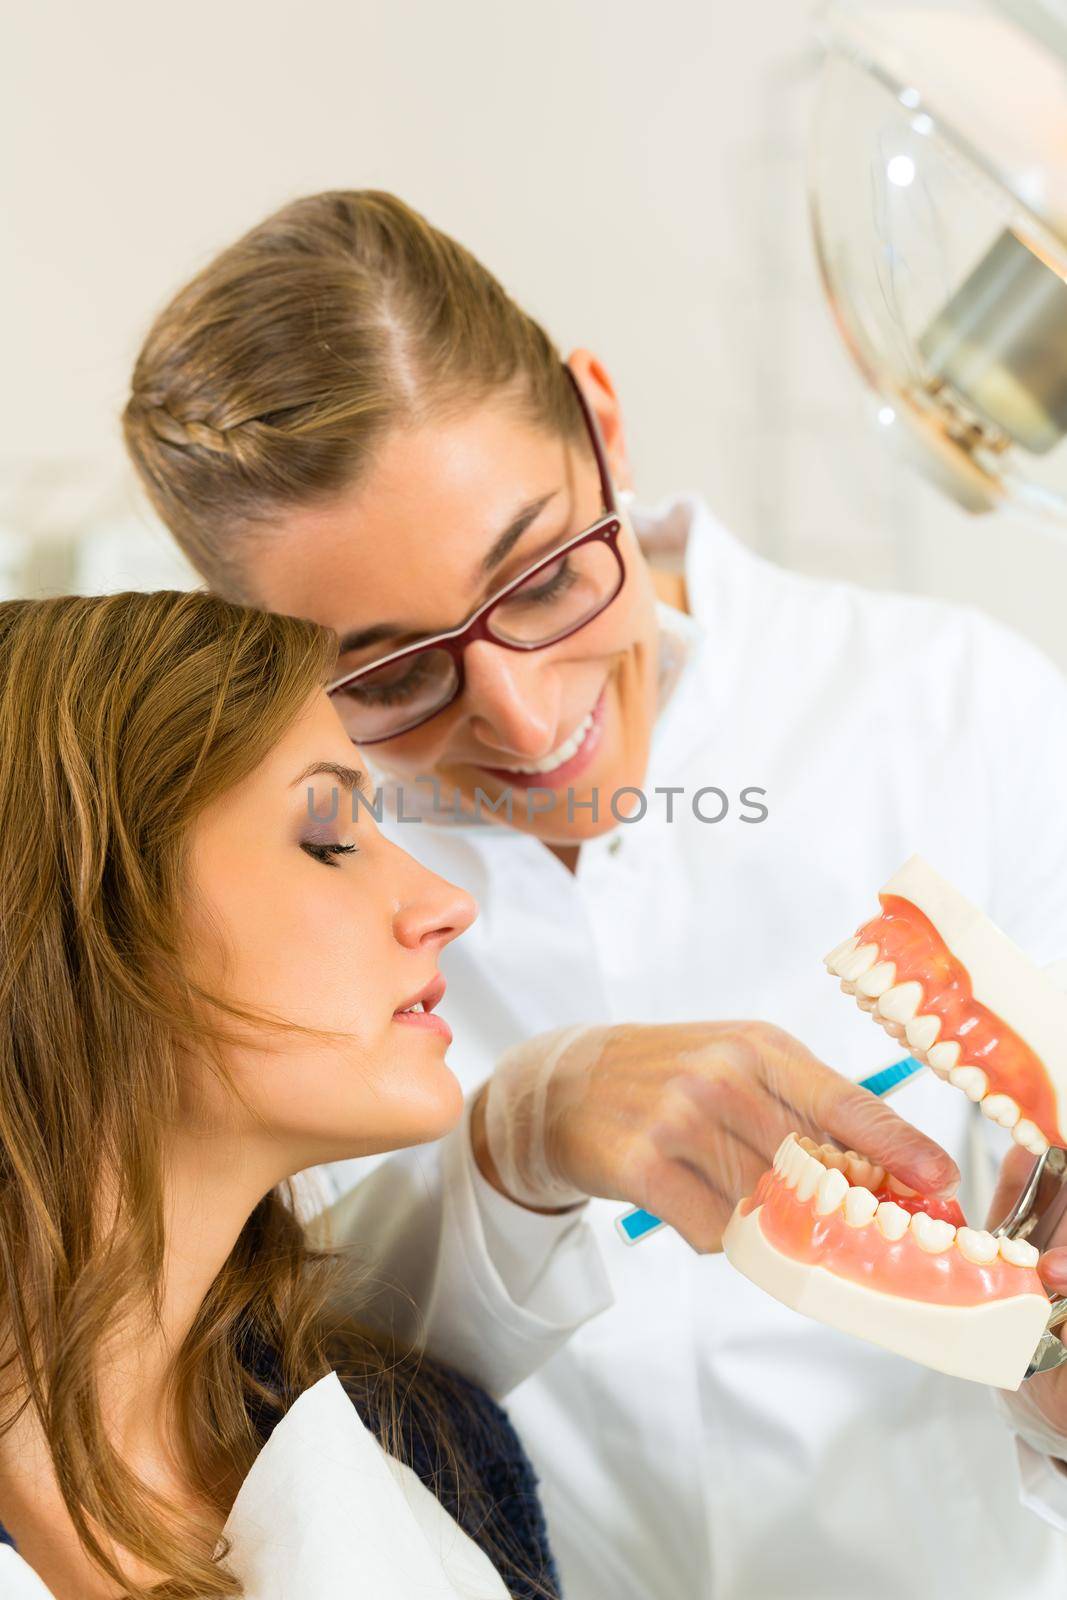 Dentist in his surgery holds a denture and explains a female patient with a toothbrush